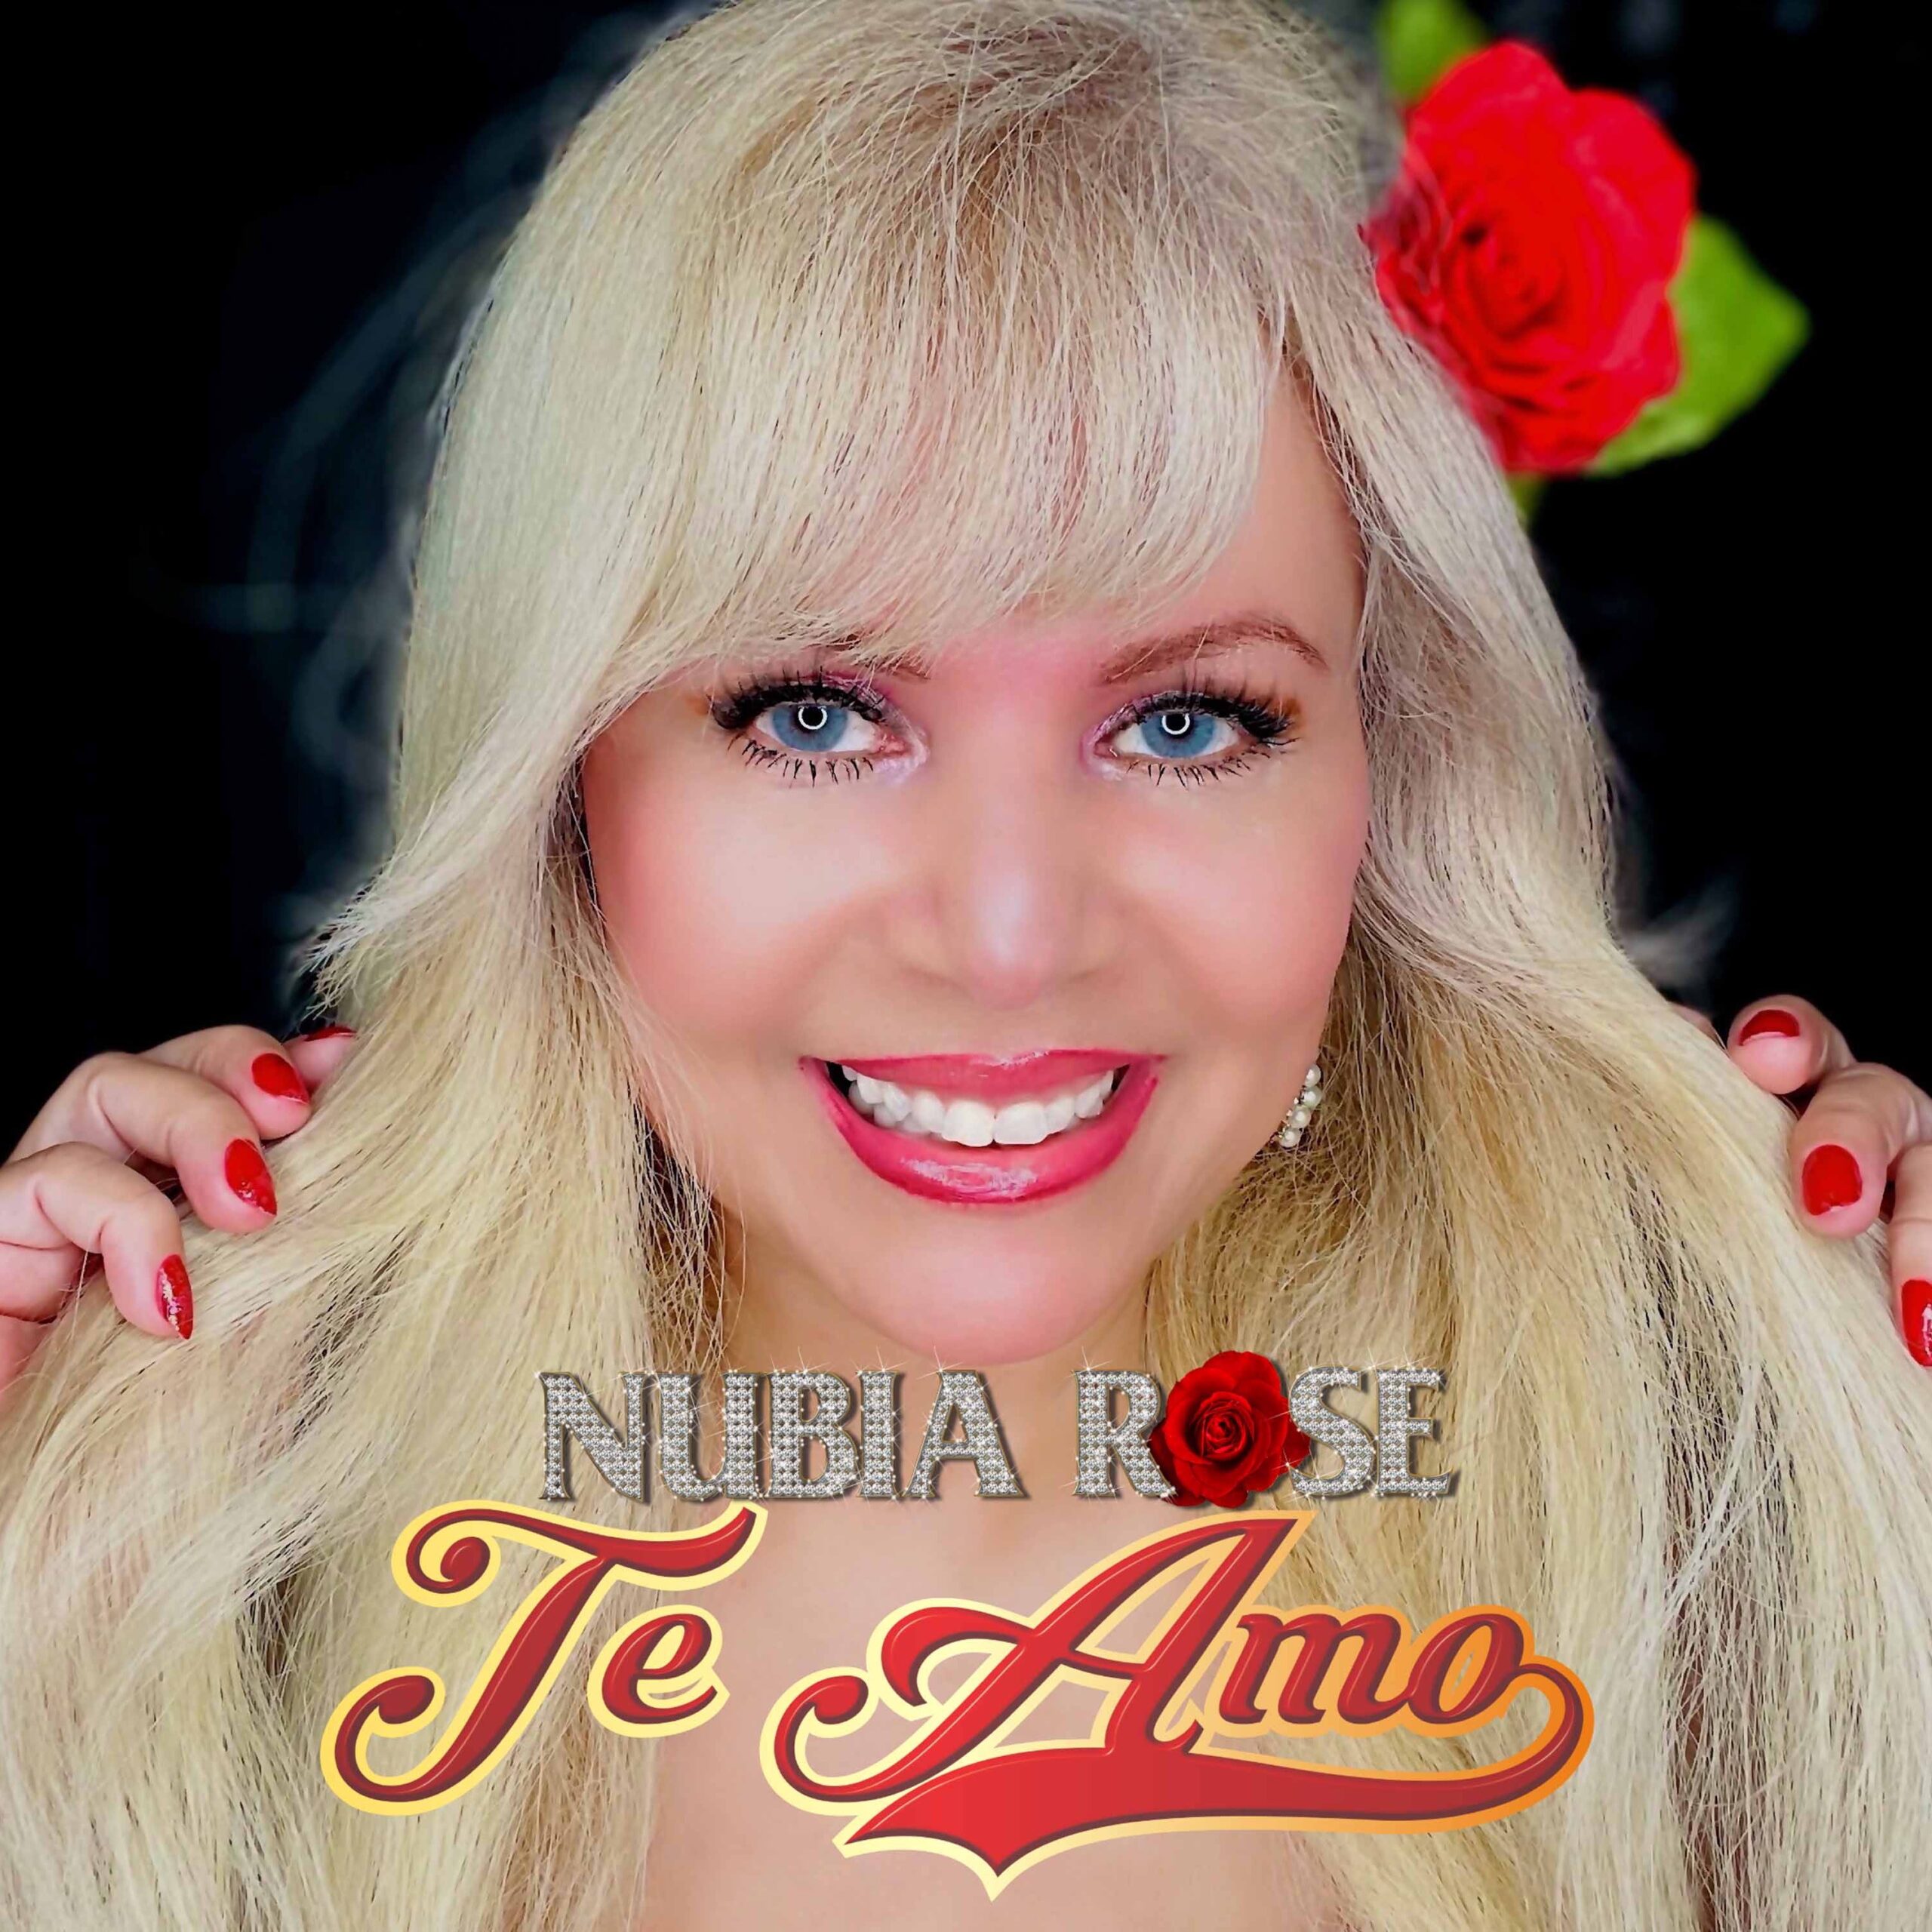 Nubia Rose’s “Te amo” song to be played on the Radio Station called  Litoral in Rio de Janeiro